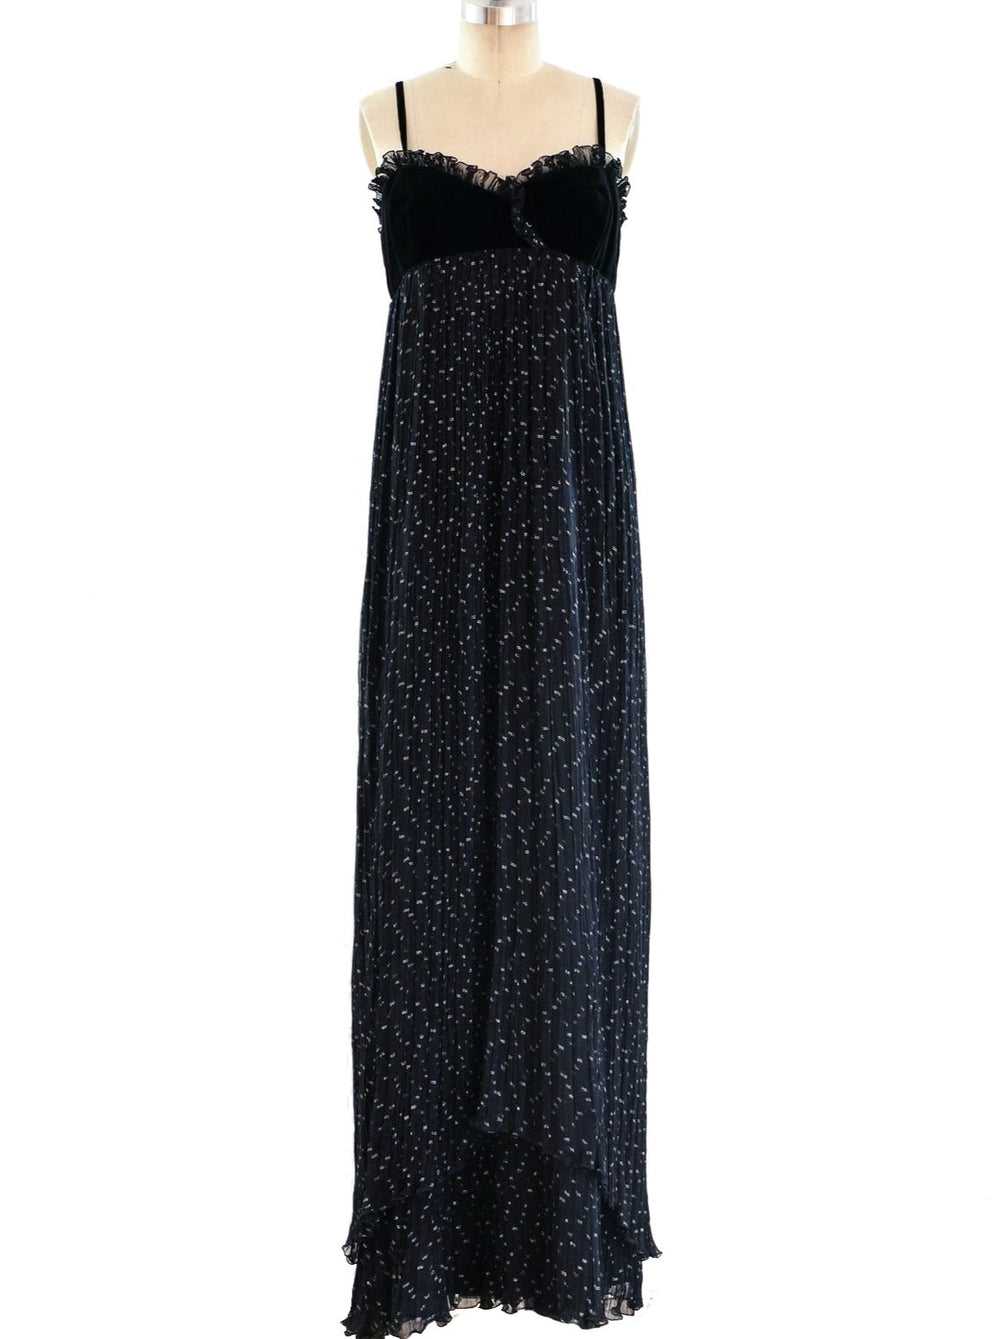 Gina Fratini Empire Gown - image 1